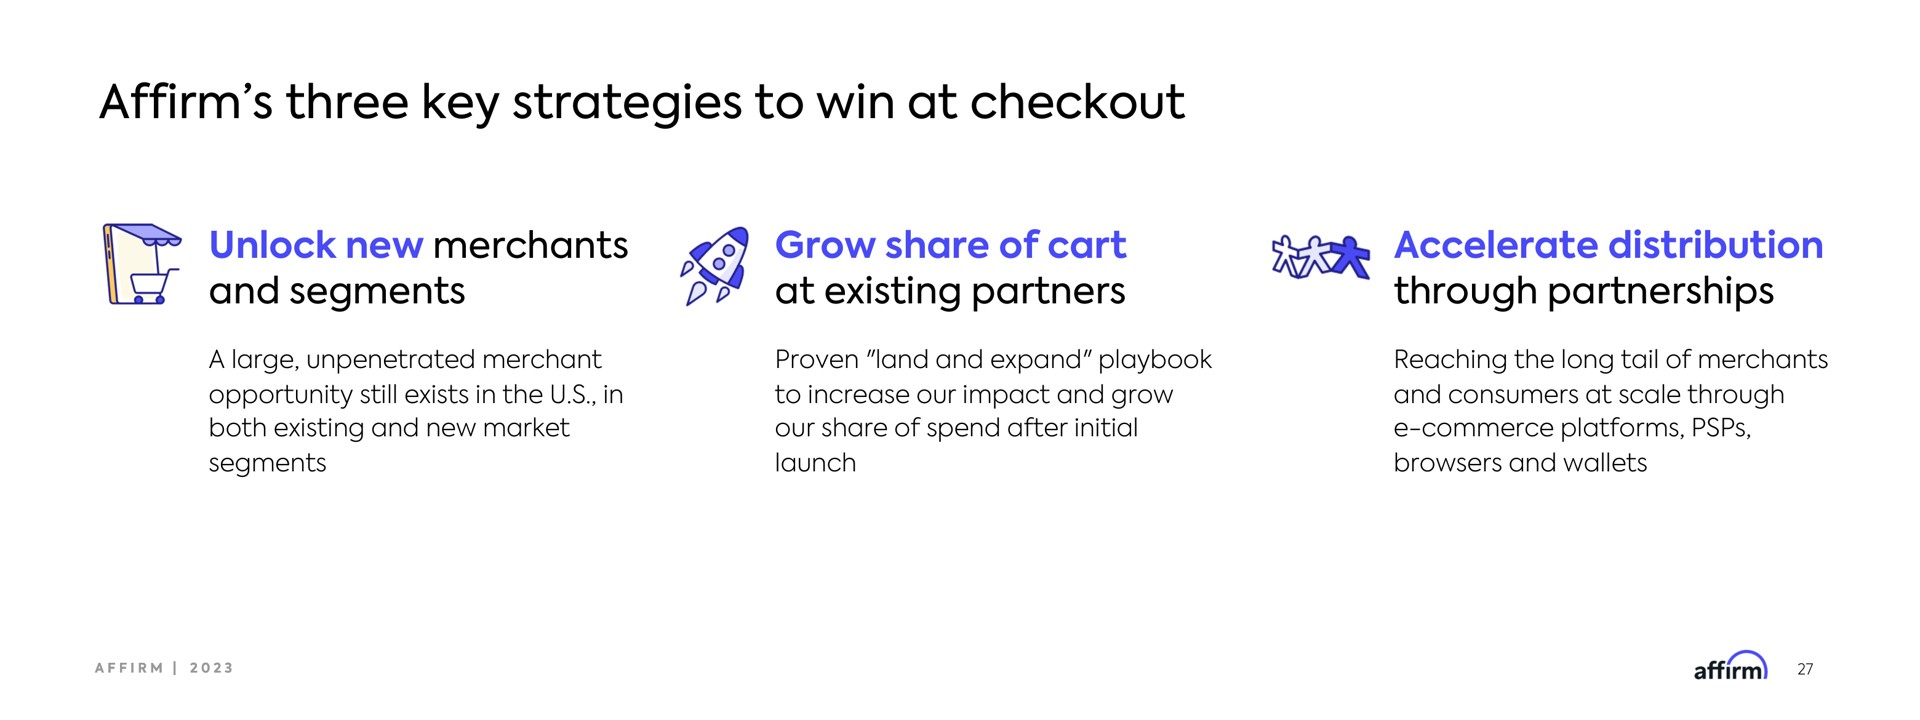 affirm three key strategies to win at unlock new merchants and segments grow share of cart at existing partners accelerate distribution through partnerships | Affirm